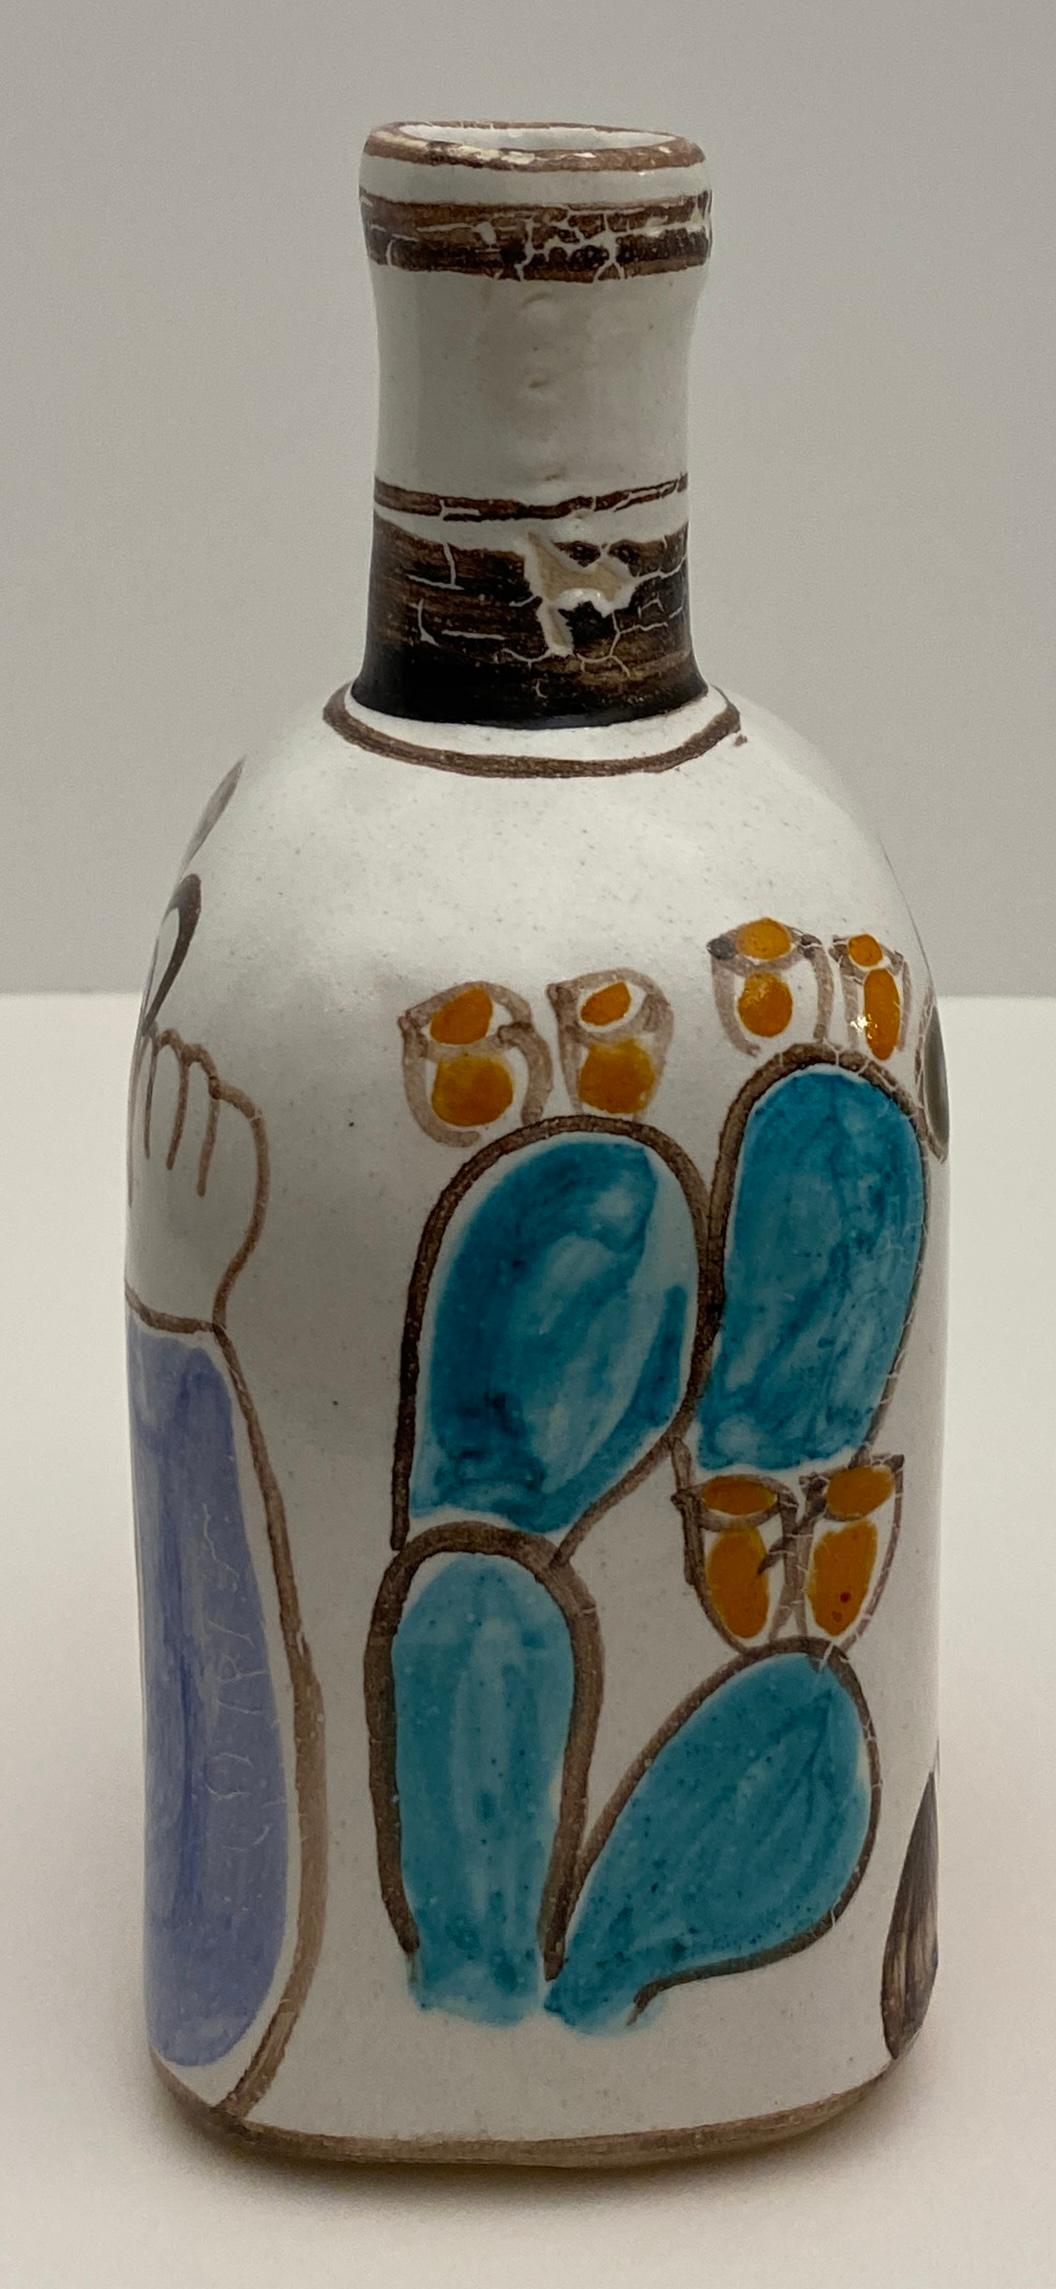 One-of-kind vase, hand-crafted and hand-painted by Giovanni Desimone.  Great design with whimsical images on both sides.  

Signed and numbered, this rare piece is colorful as the usual pieces by Desimone are. Very well-made piece that will add